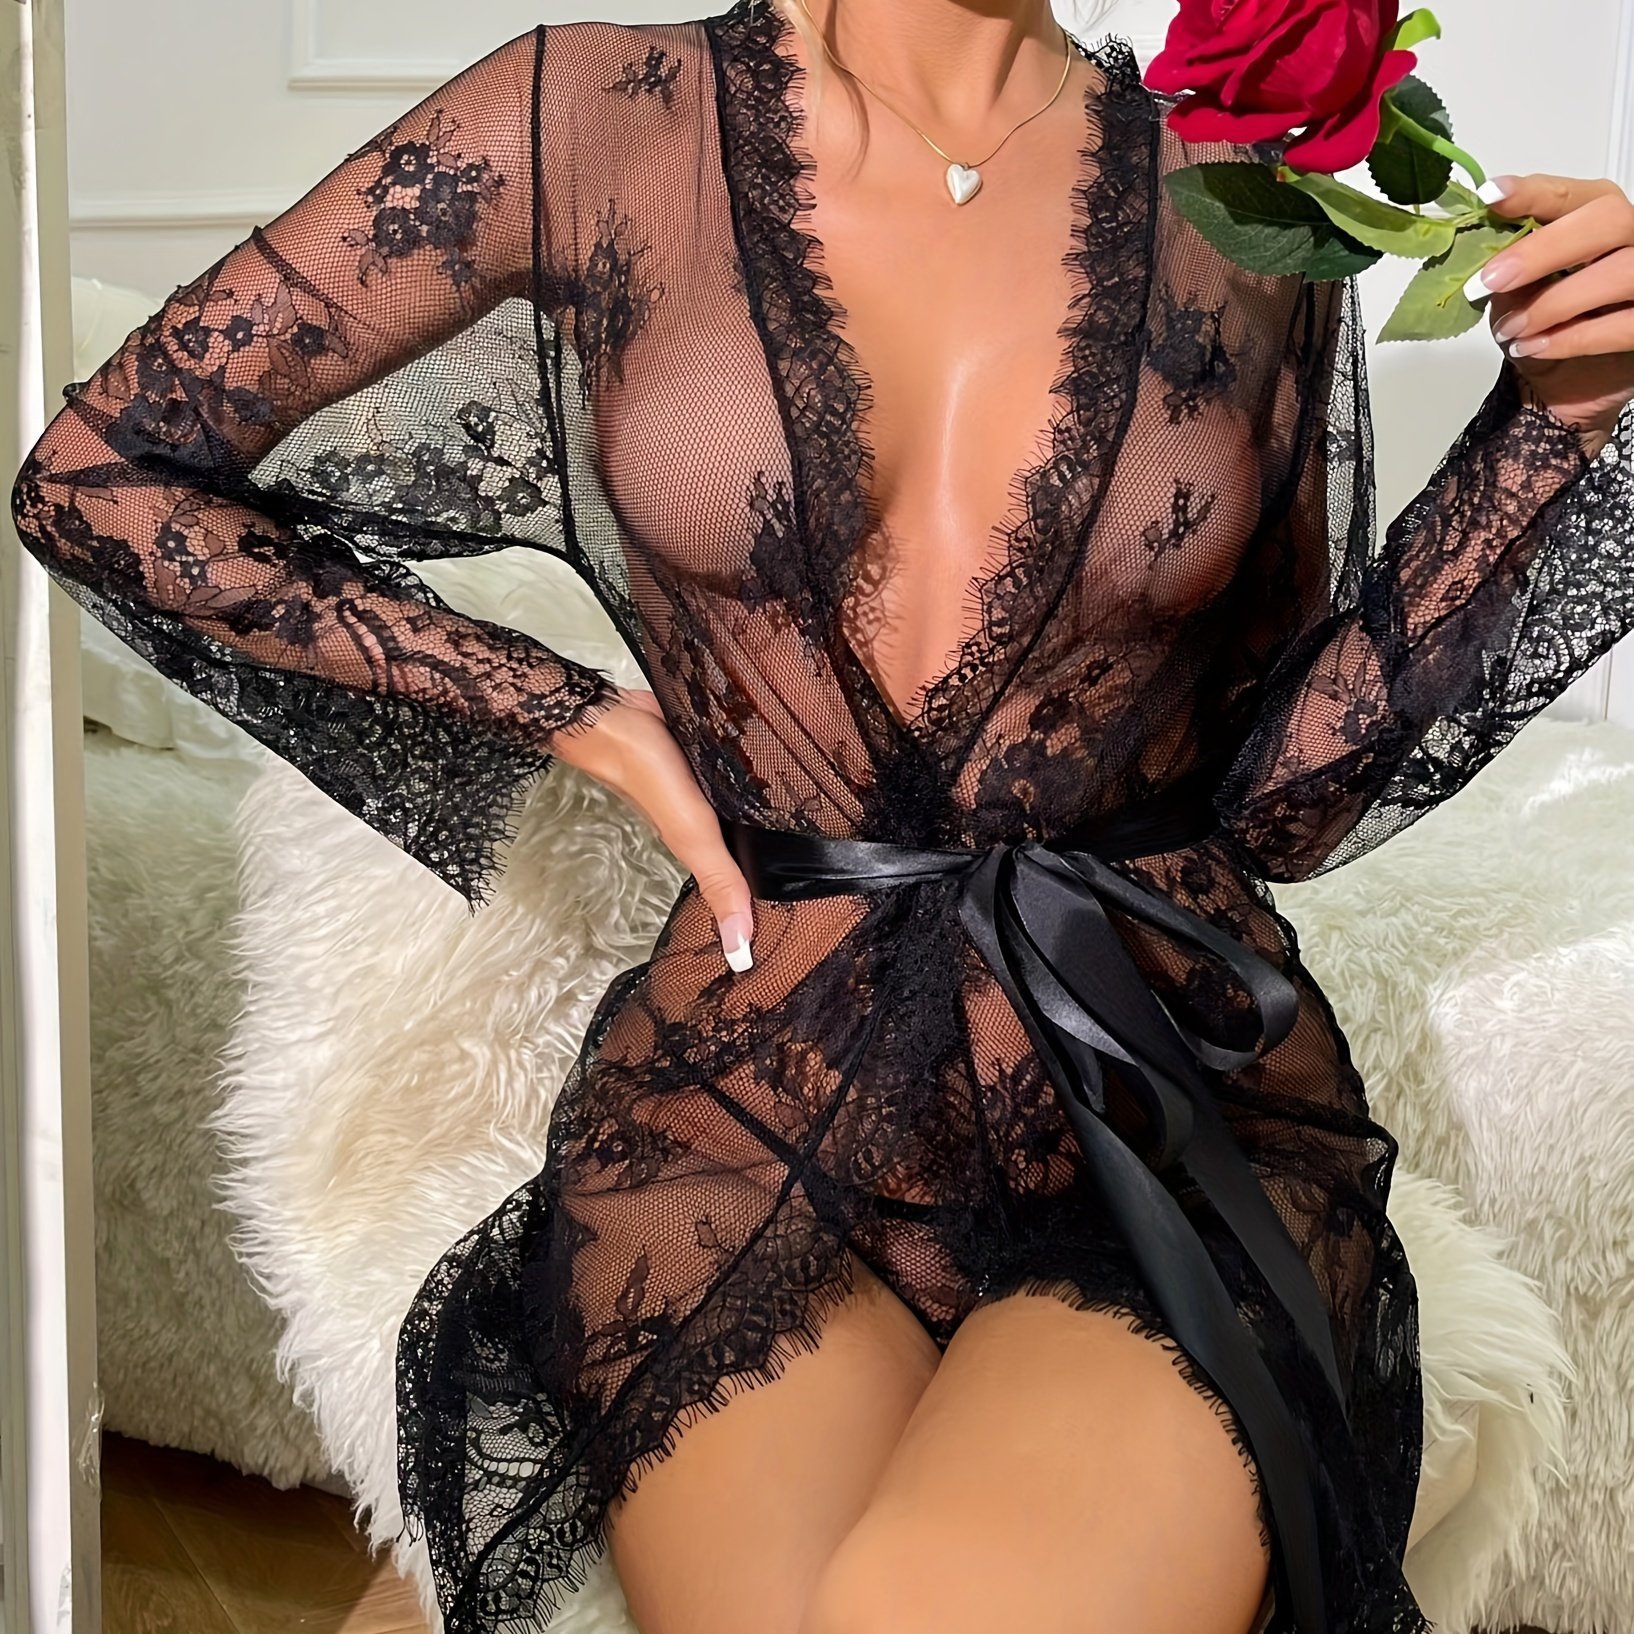 LSFYSZD Women Deep V-neck Sexy Lingerie Robes Long Sleeve Lace